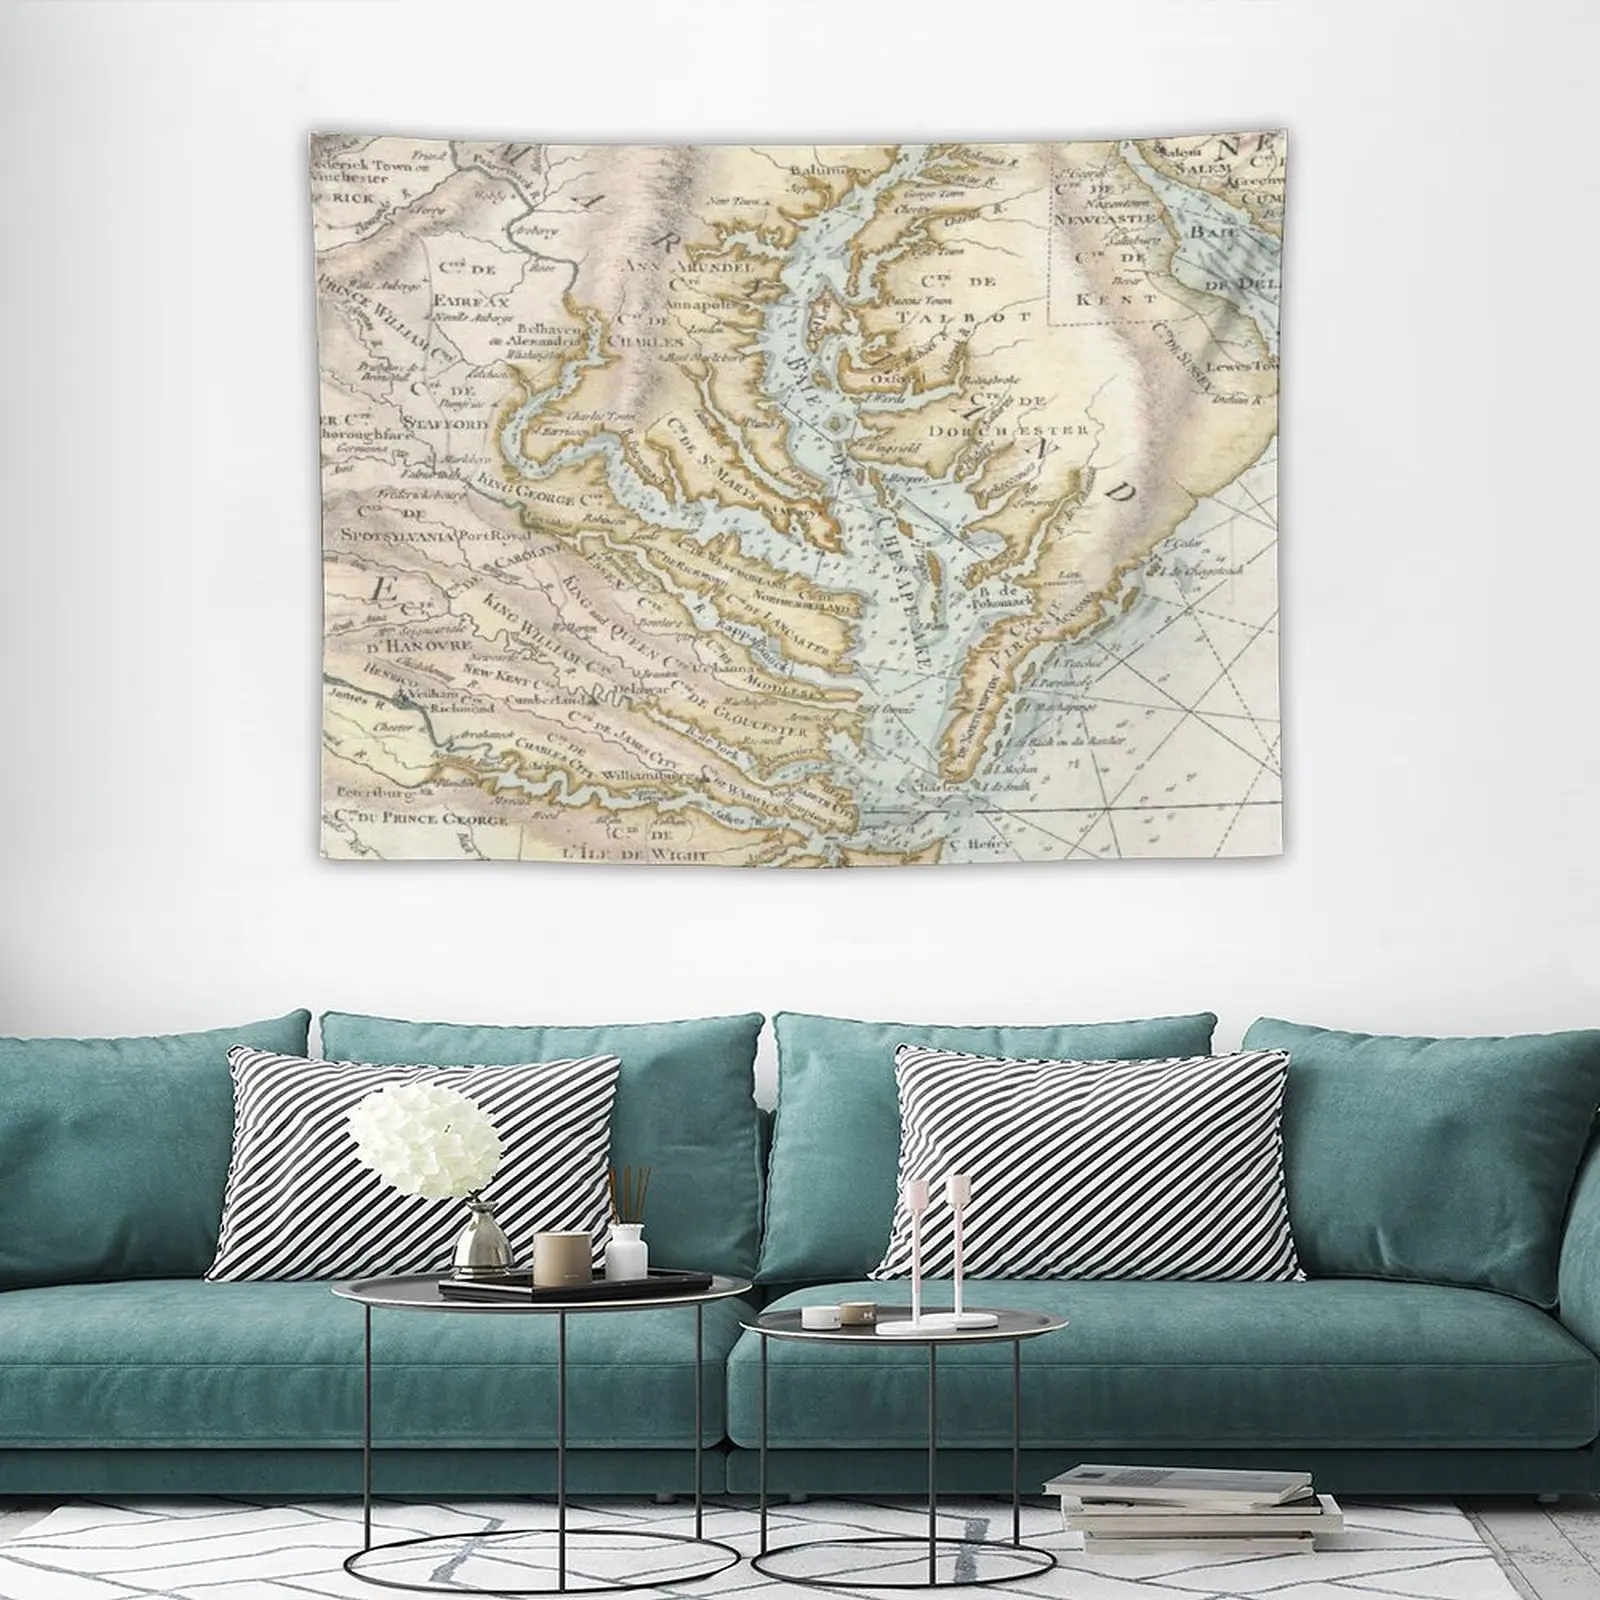 

Tree Vintage Map of The Chesapeake Bay (1778) 2 Tapestry Aesthetic Room Decor Aesthetic Room Living Room Decoration Christmas A